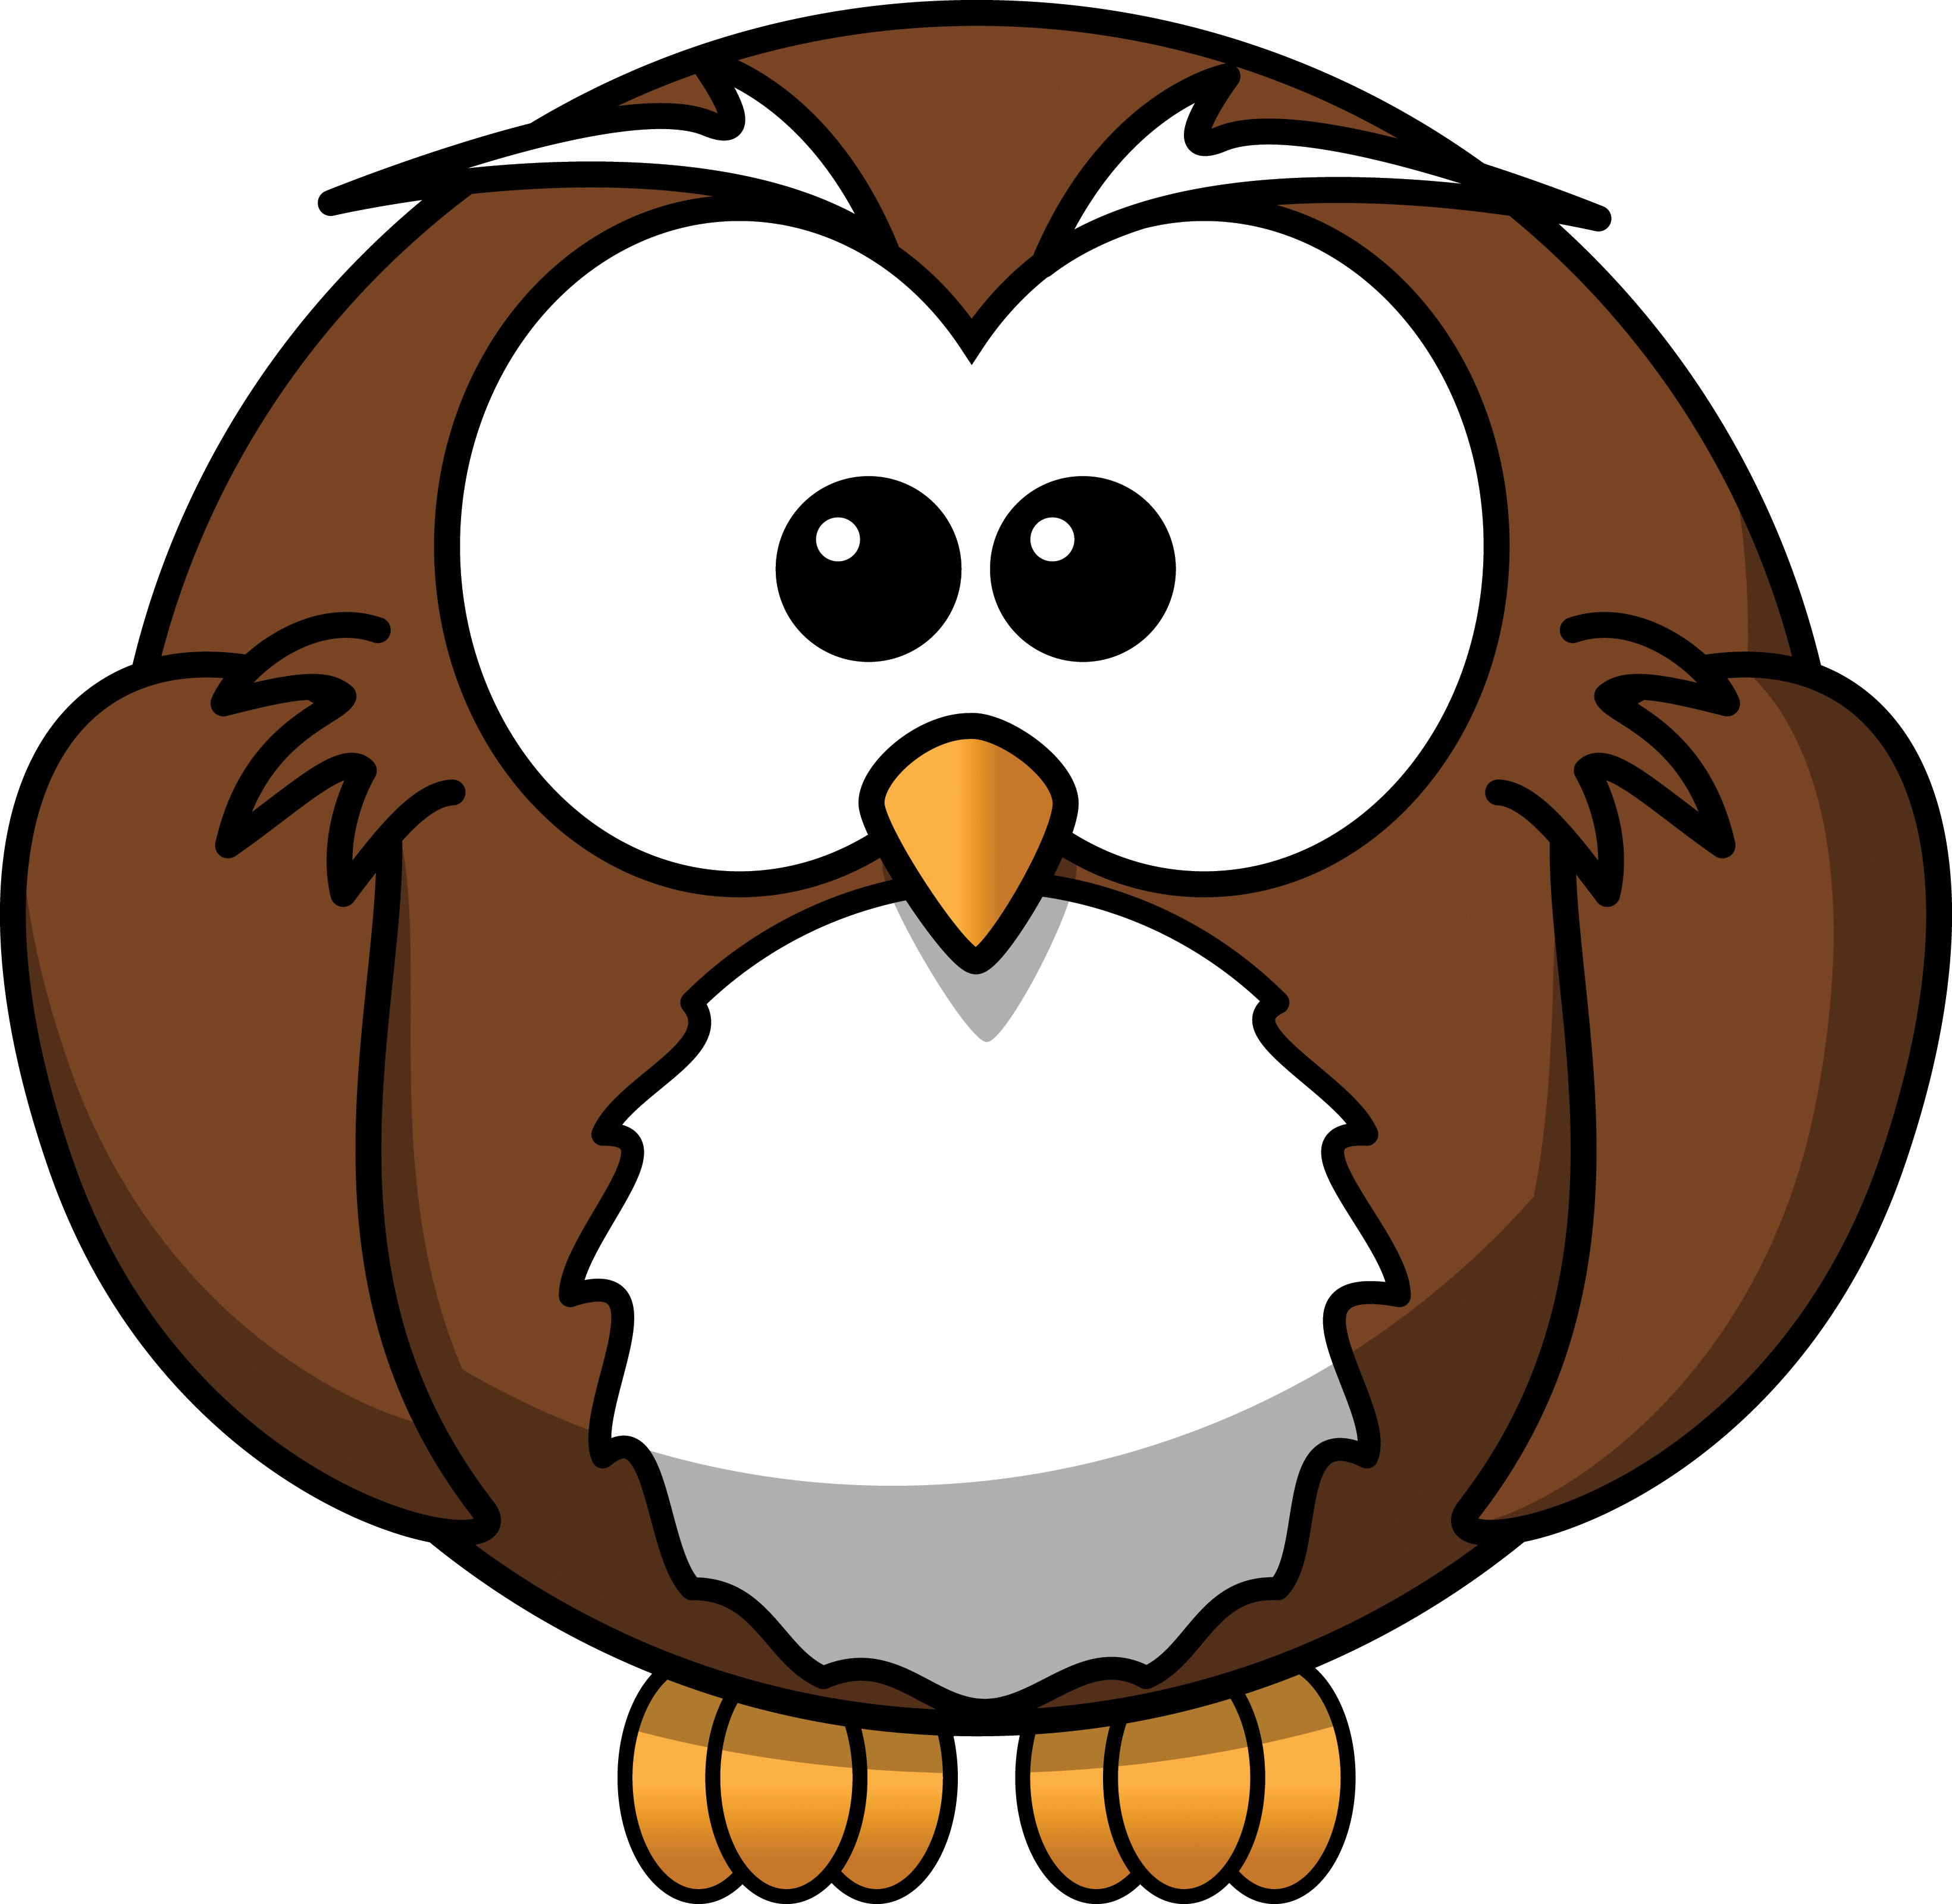 Free clipart owl with glasses